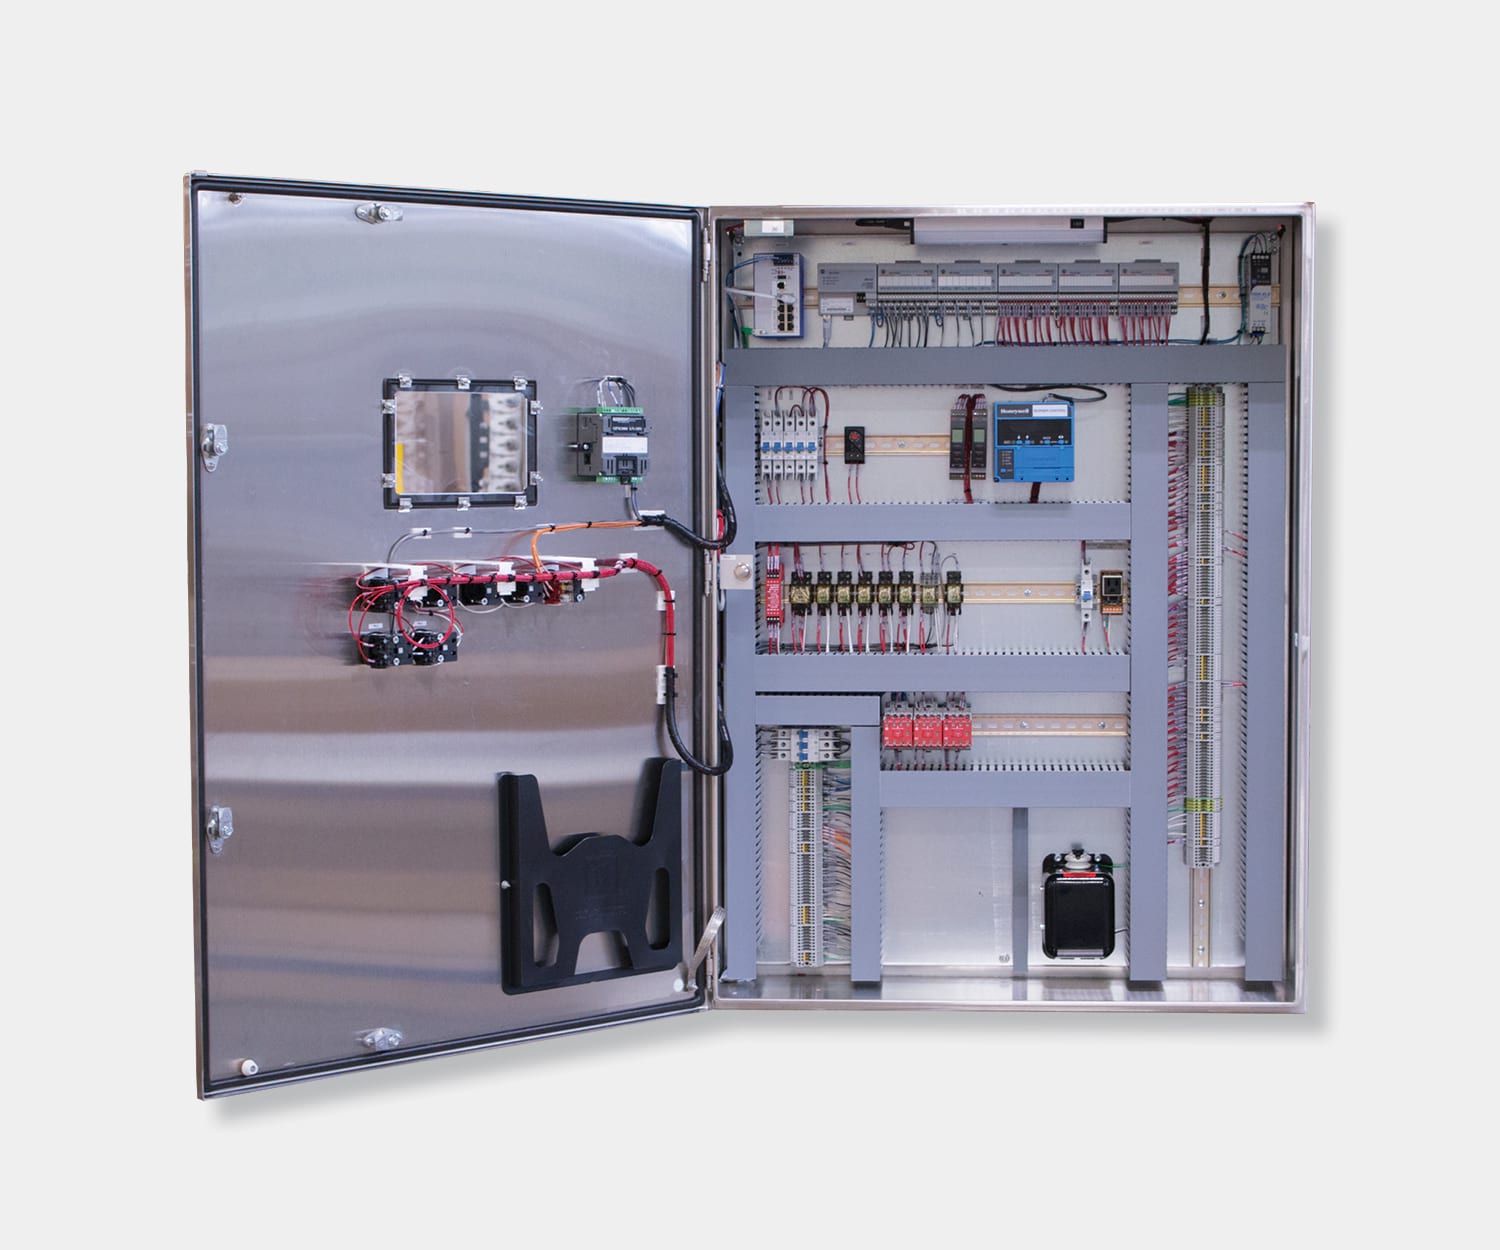 Industrial Control Panel With and IO rack and Stainless Steel Enclosure